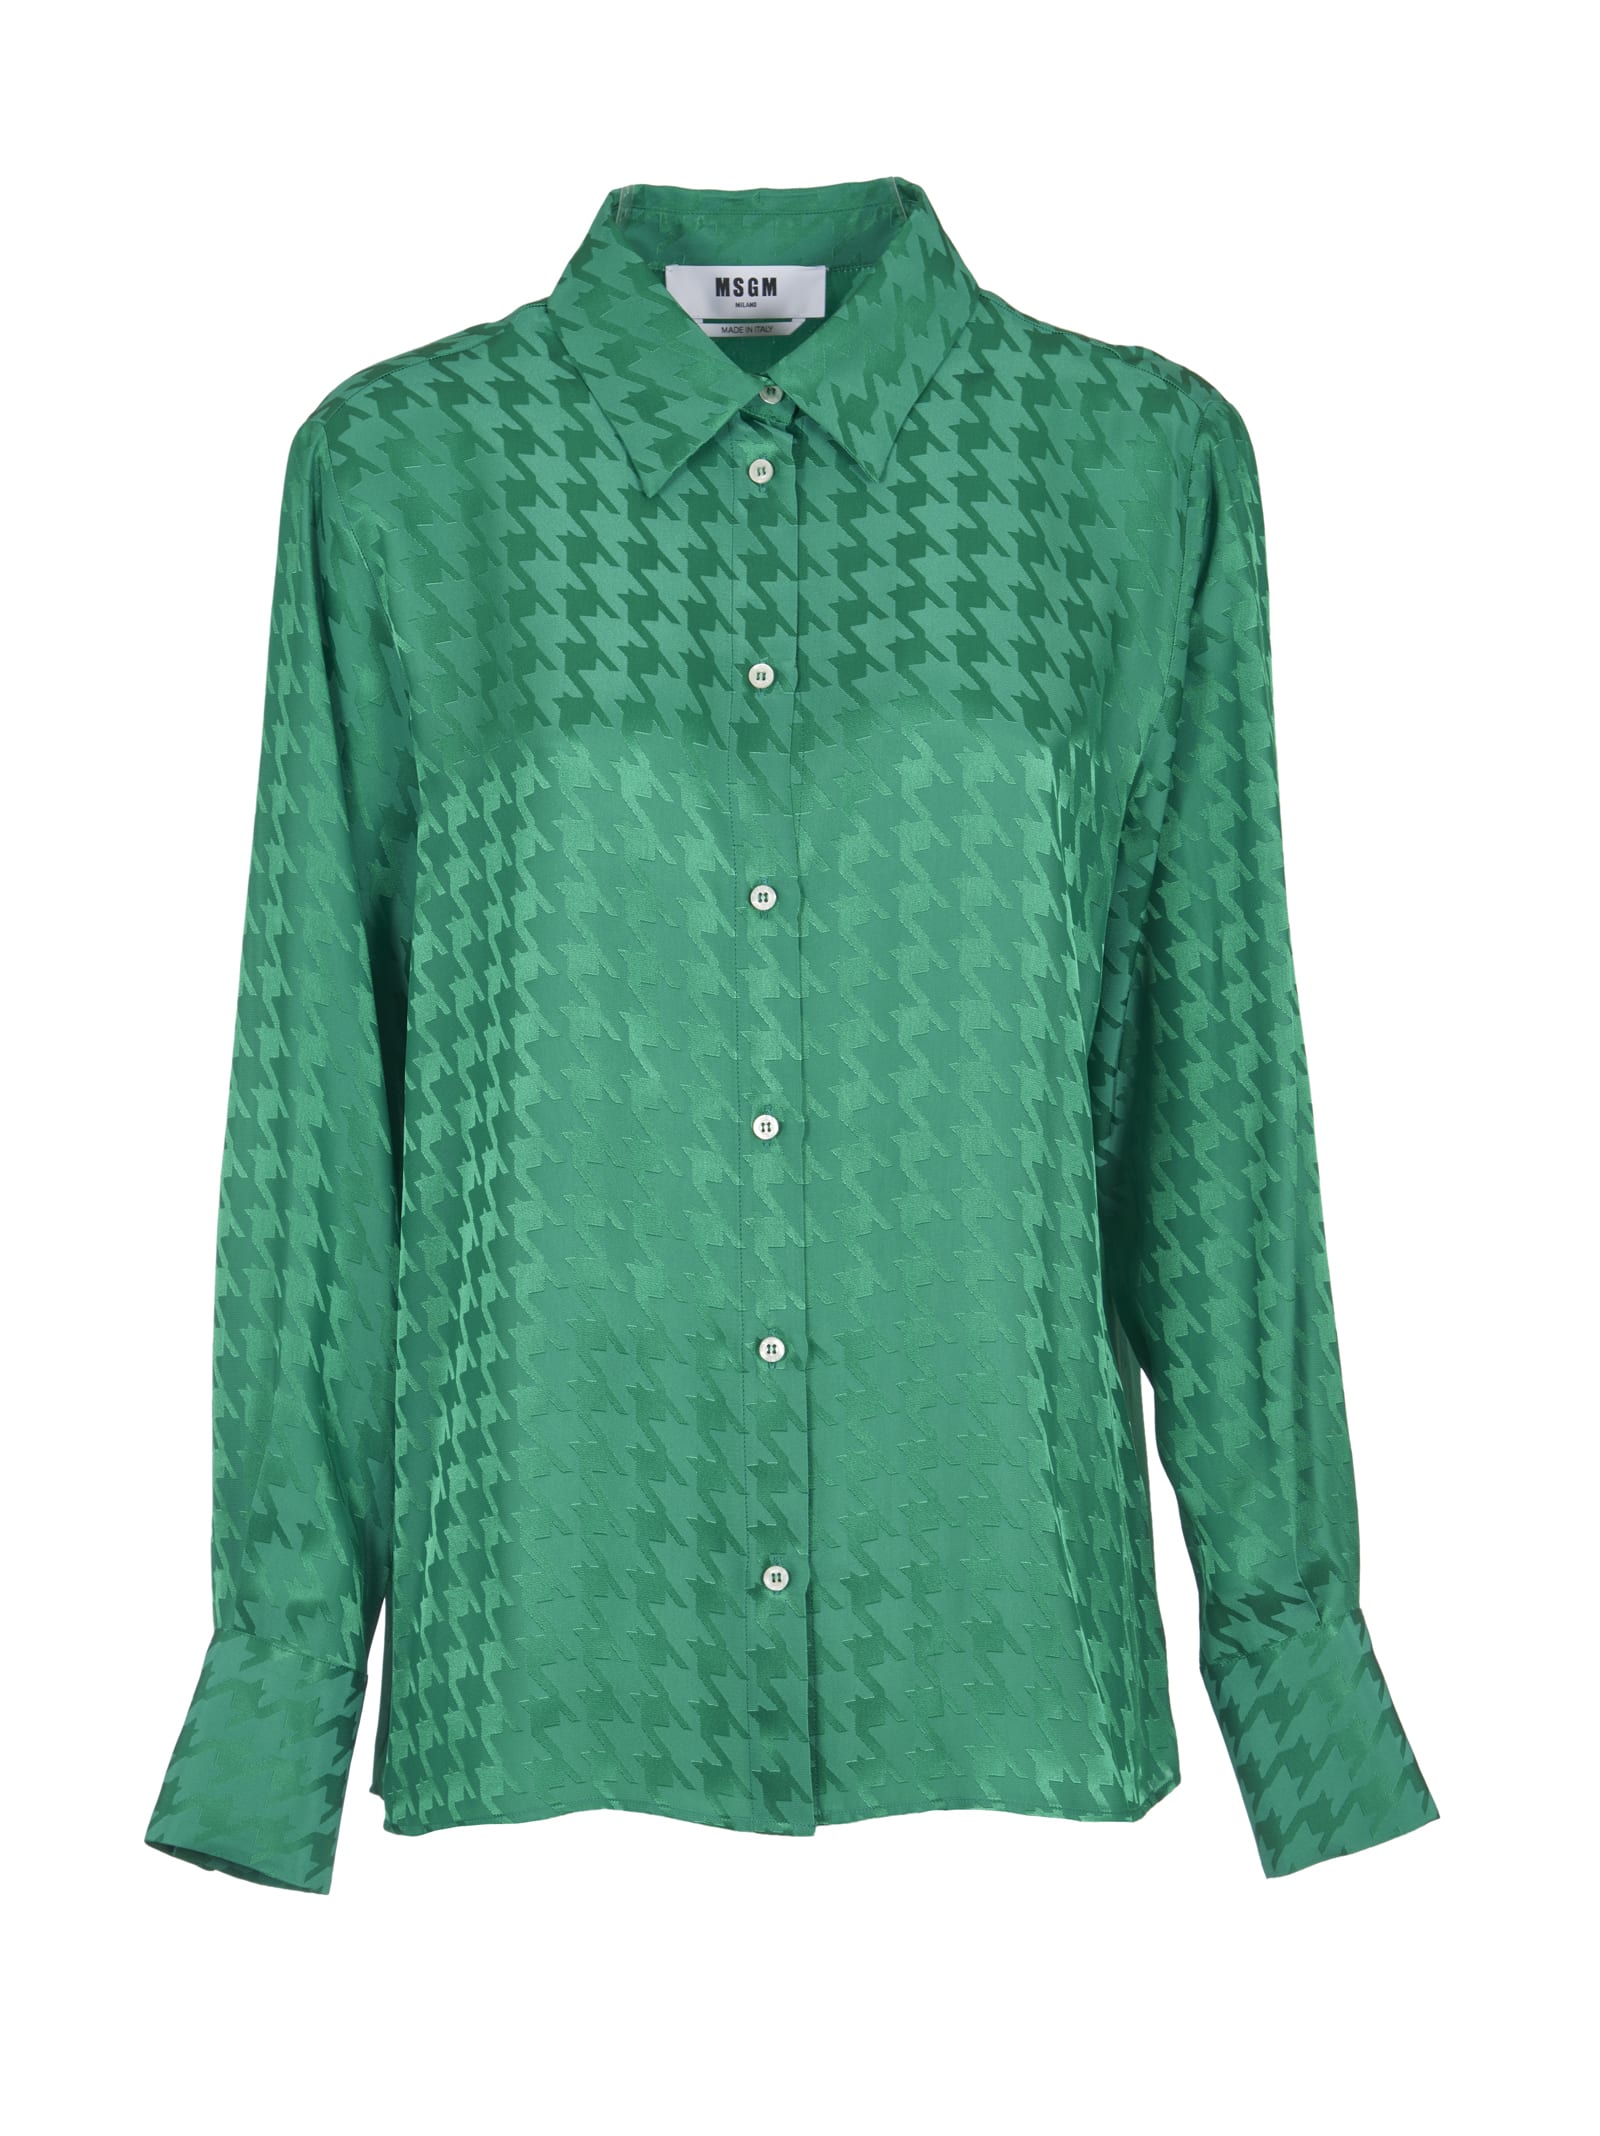 MSGM HOUNDSTOOTH PATTERNED SHIRT